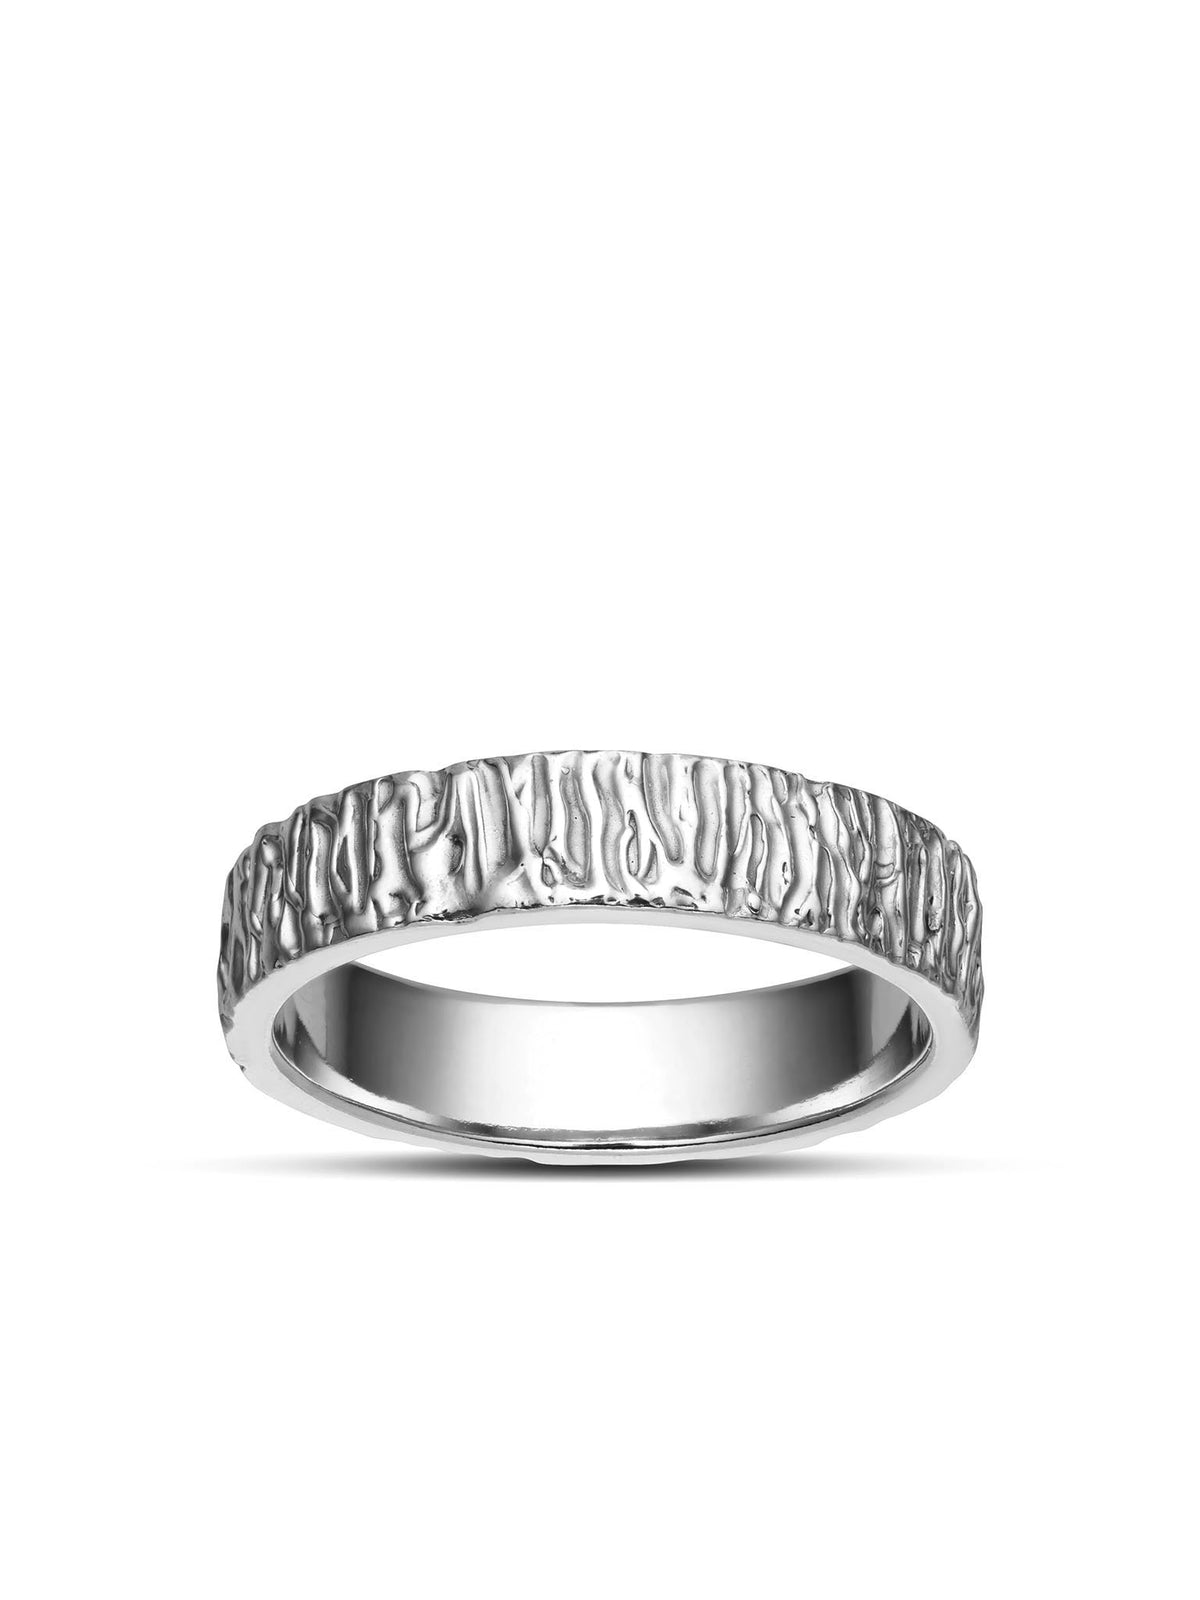 Forest Wedding Band / White Gold